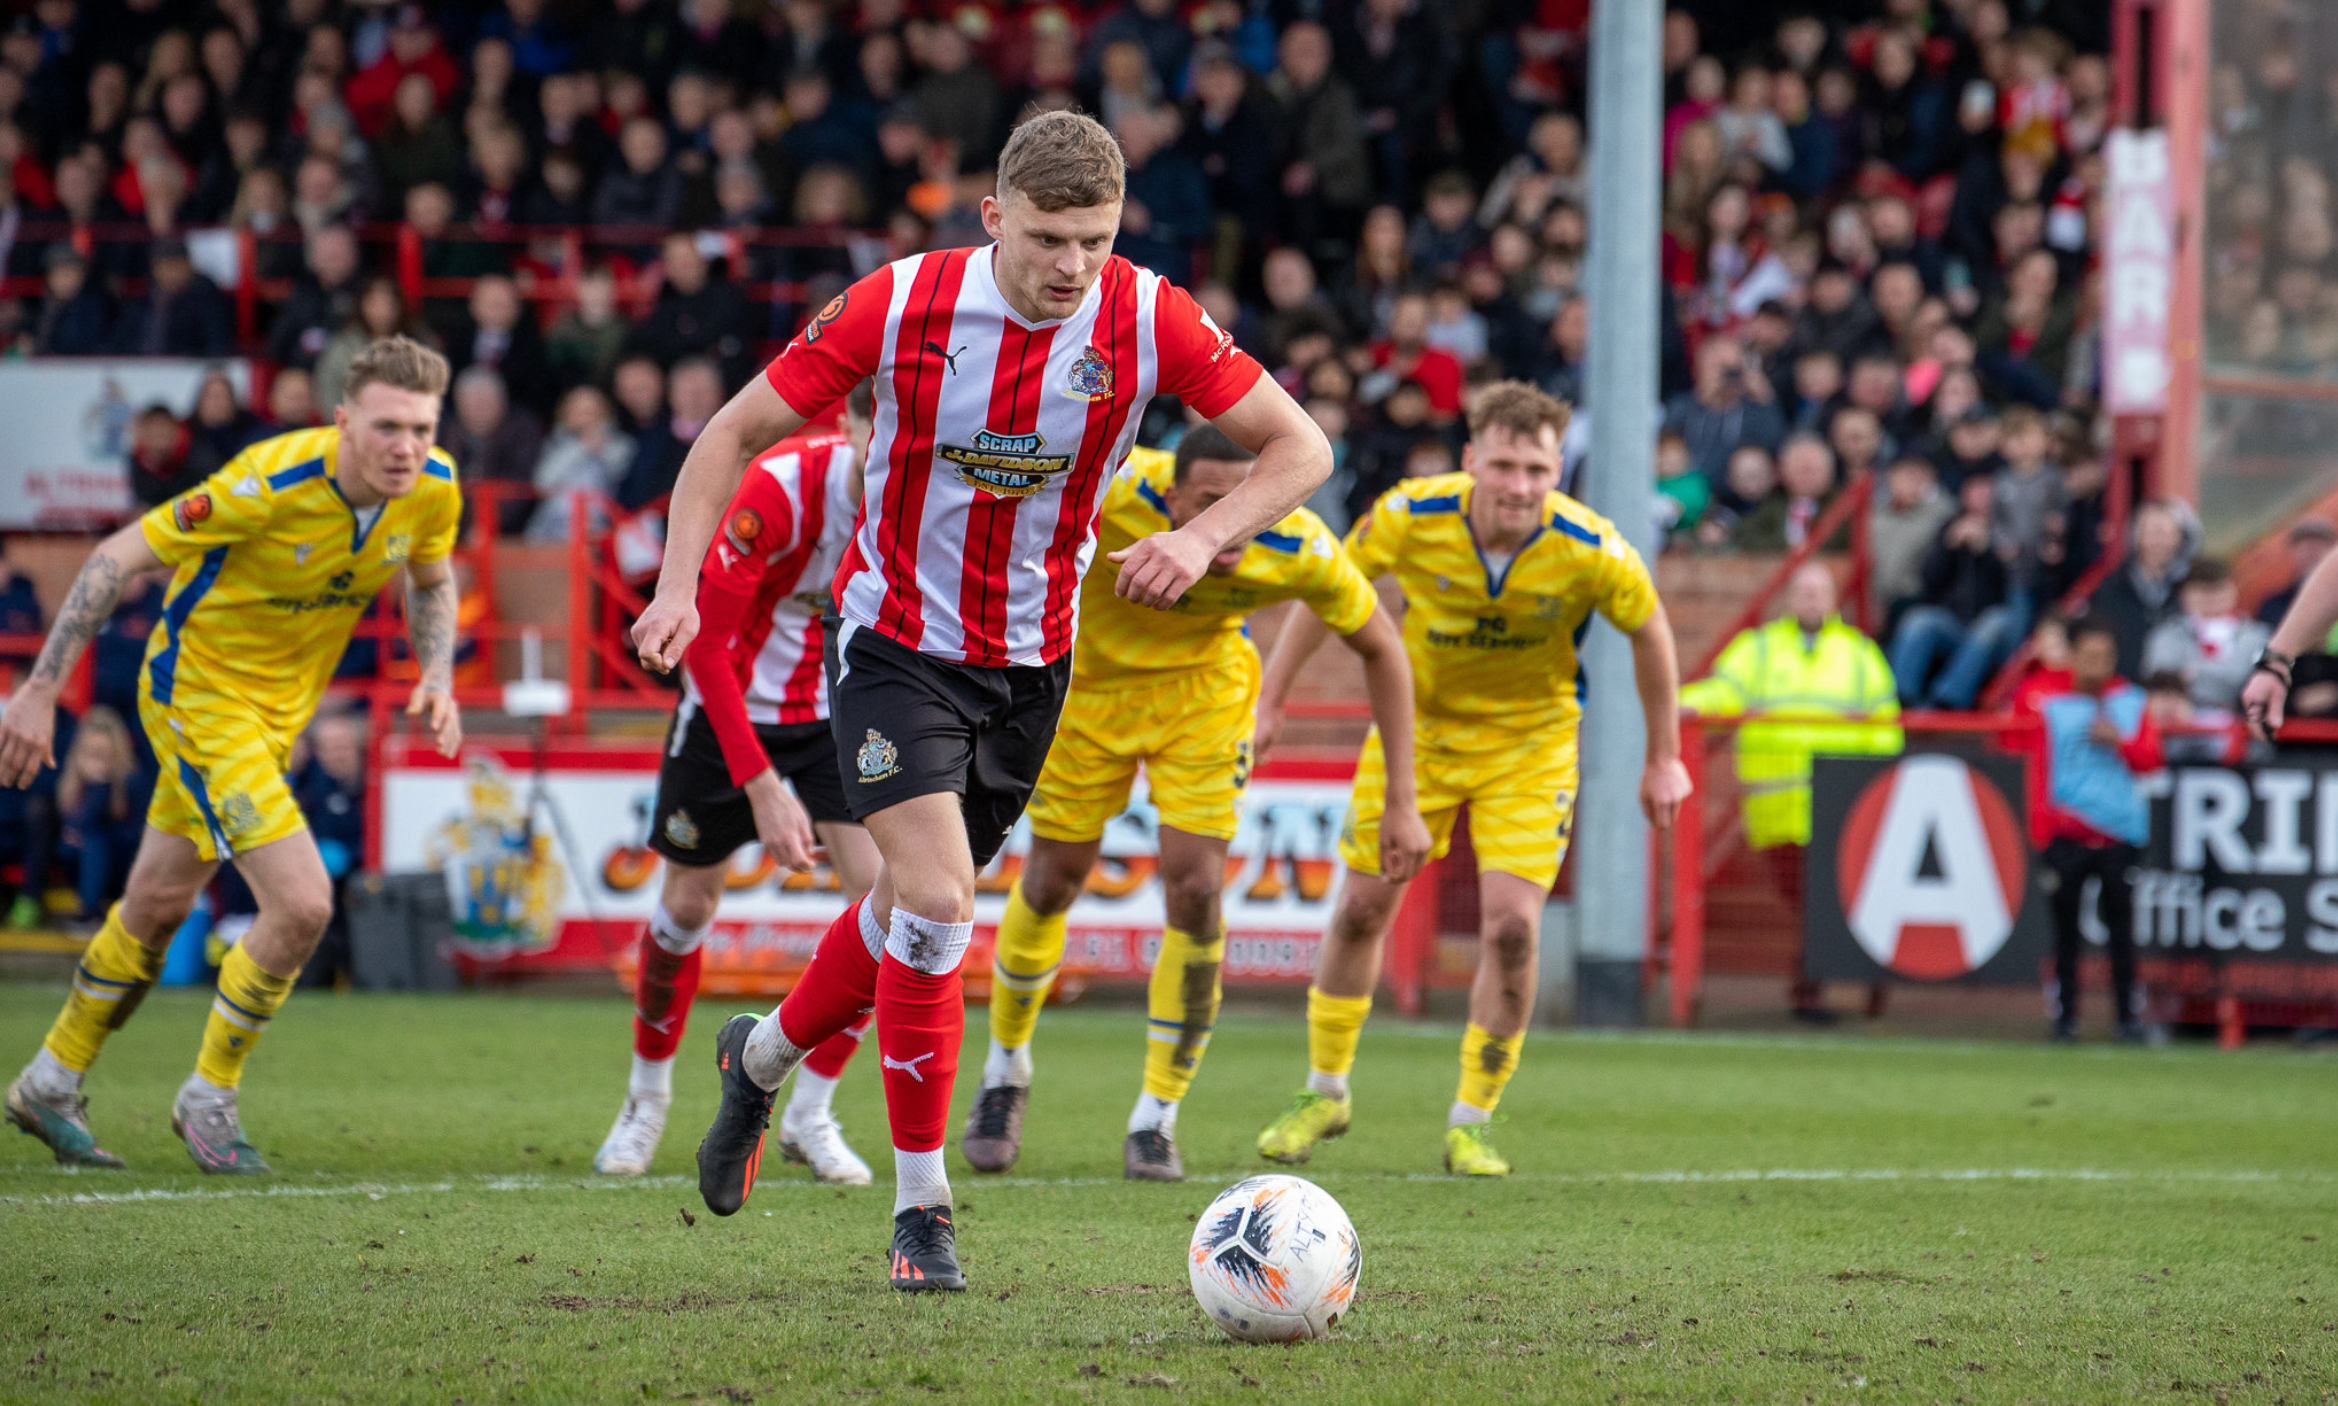 ALTRINCHAM Vs SOUTHEND UNITED, Extended Match Highlights